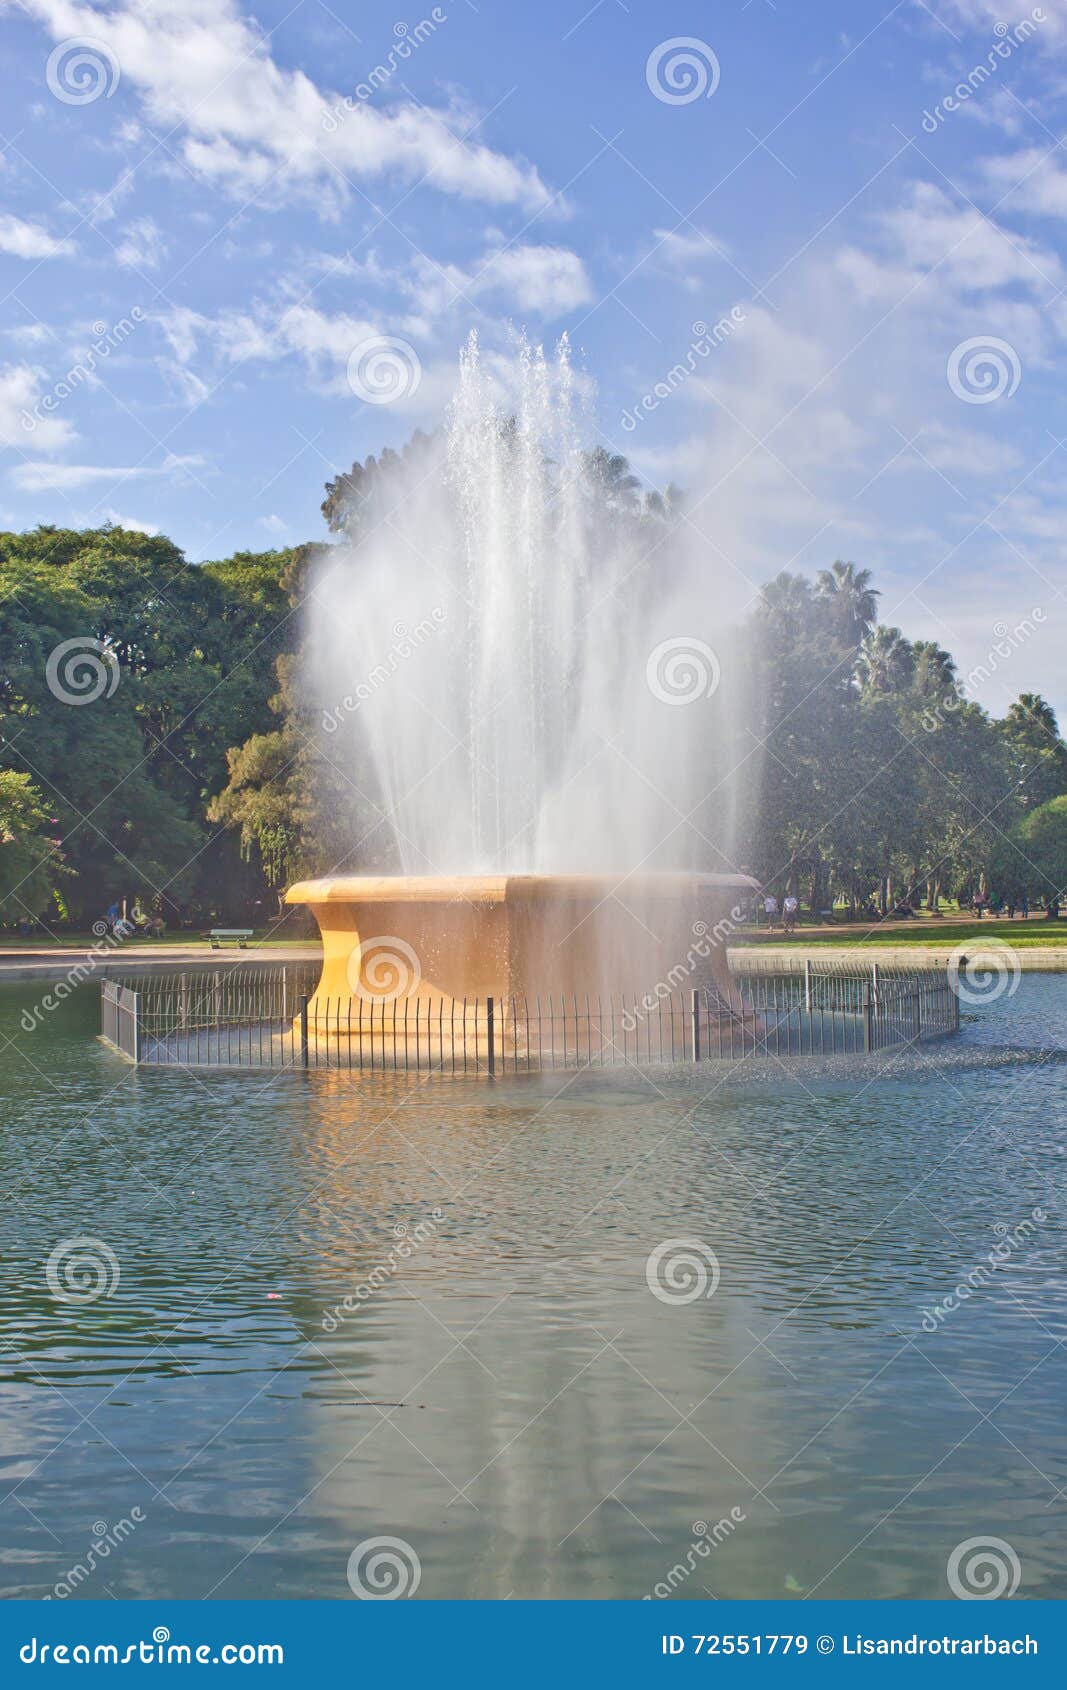 fountain at redencao park